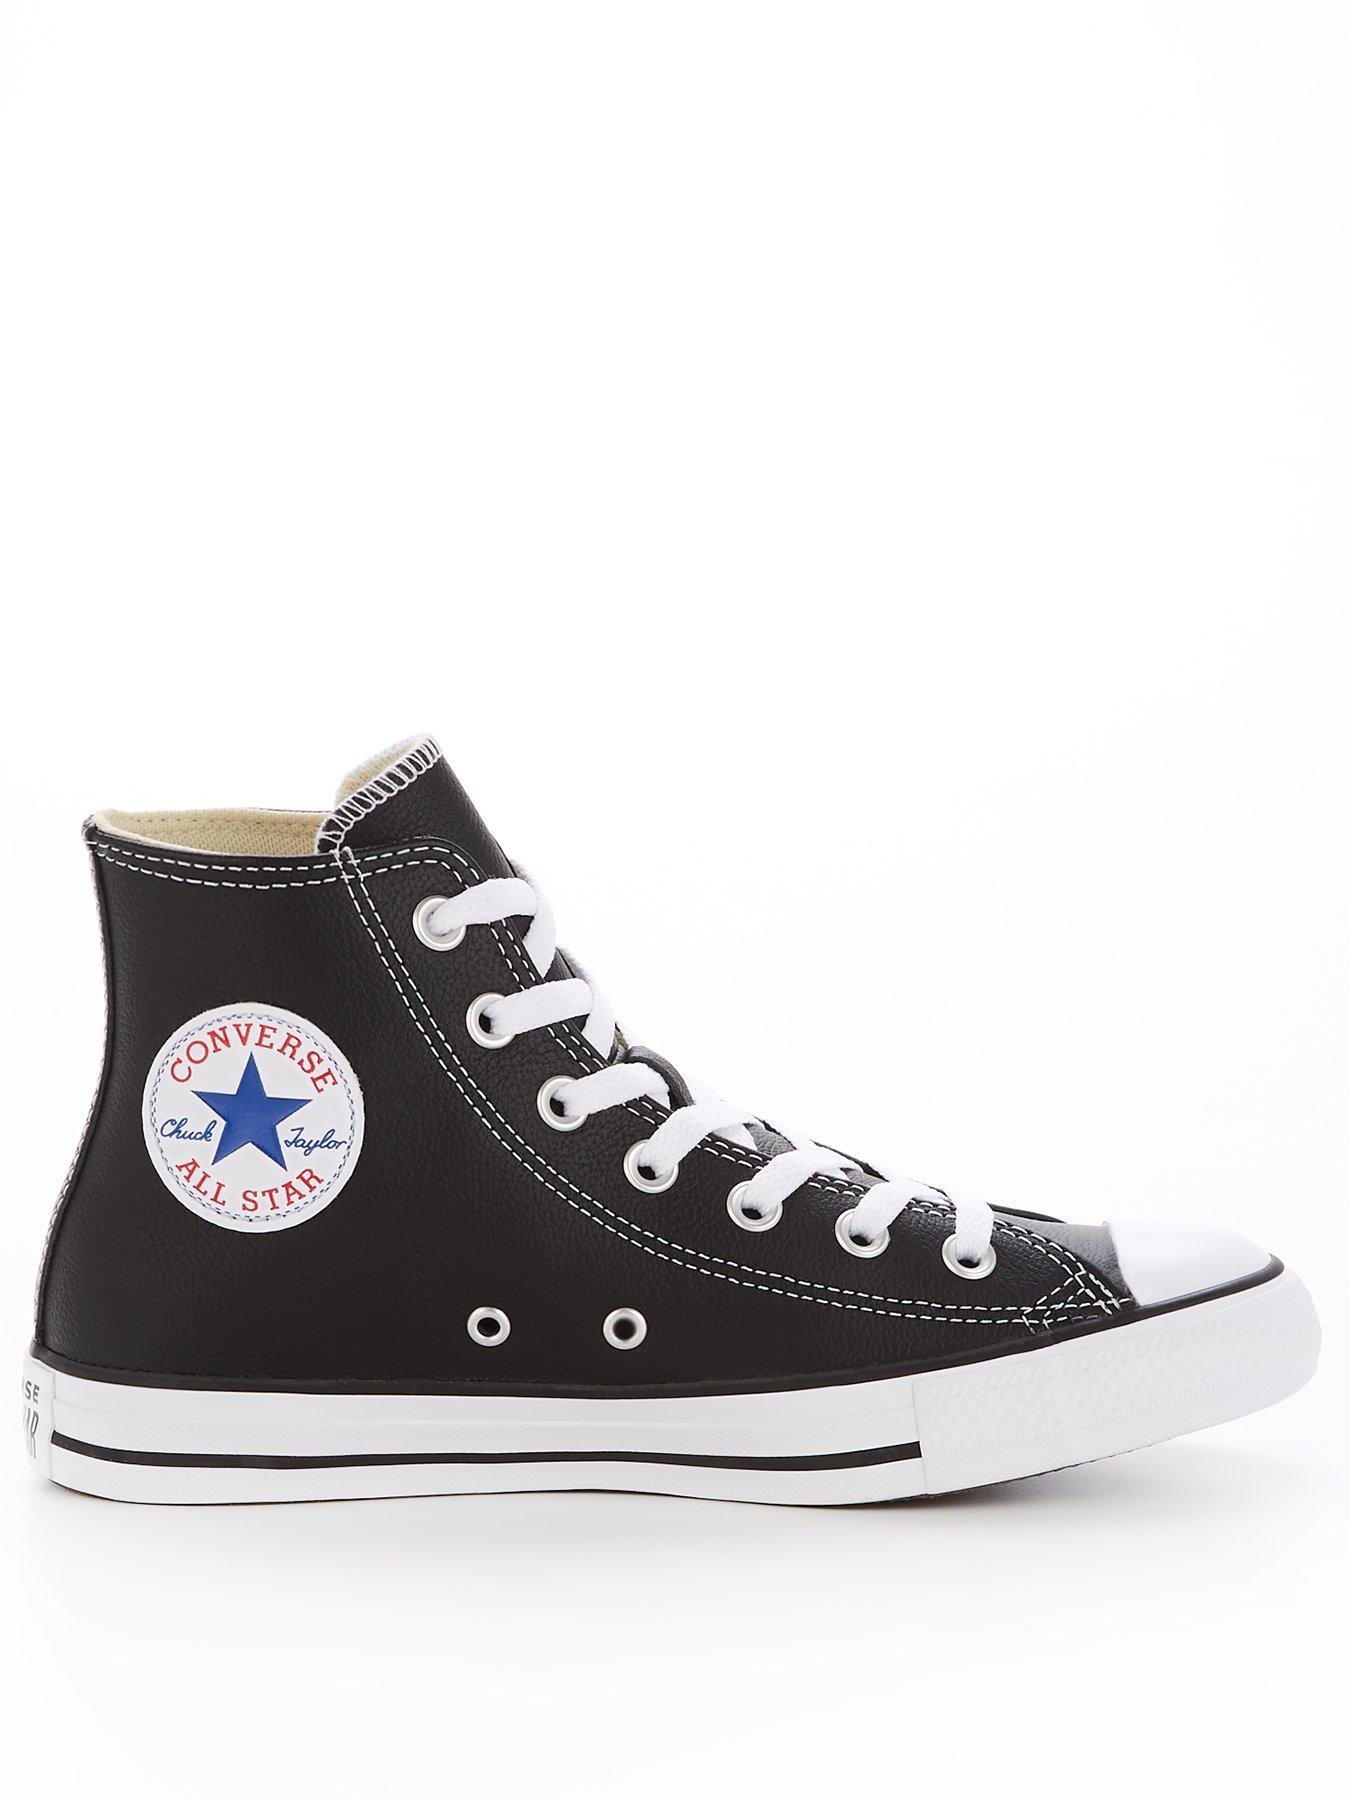 Converse Womens Leather Hi Trainers - Black | littlewoods.com